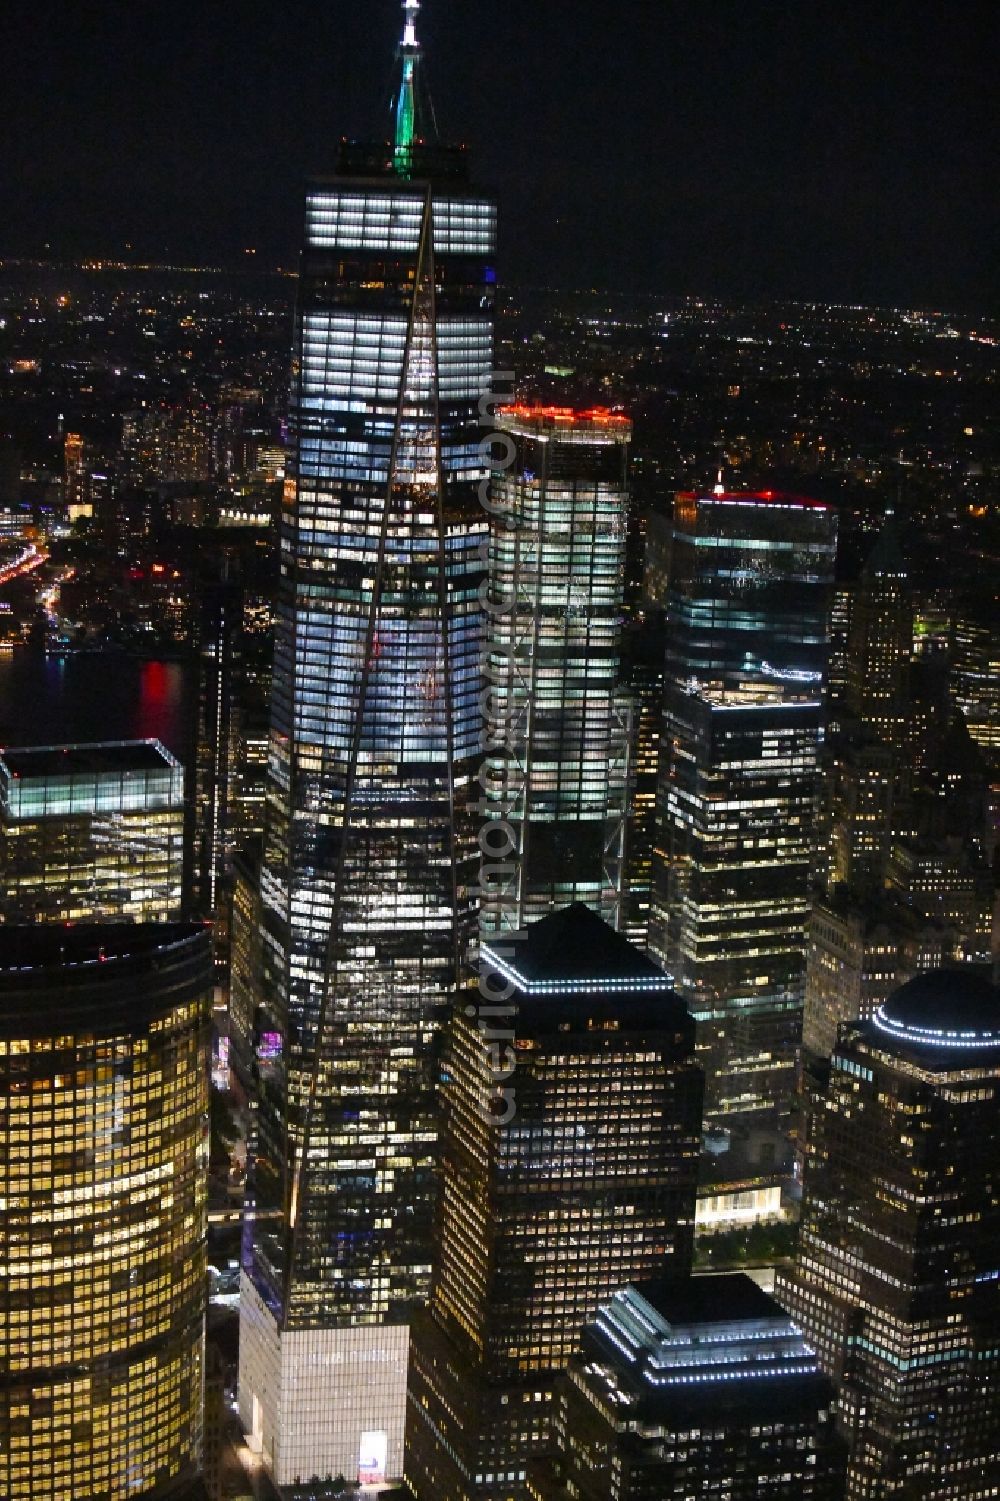 Aerial image at night New York - Night lighting High-rise buildings One World Trade Center in the district Manhattan in New York in United States of America